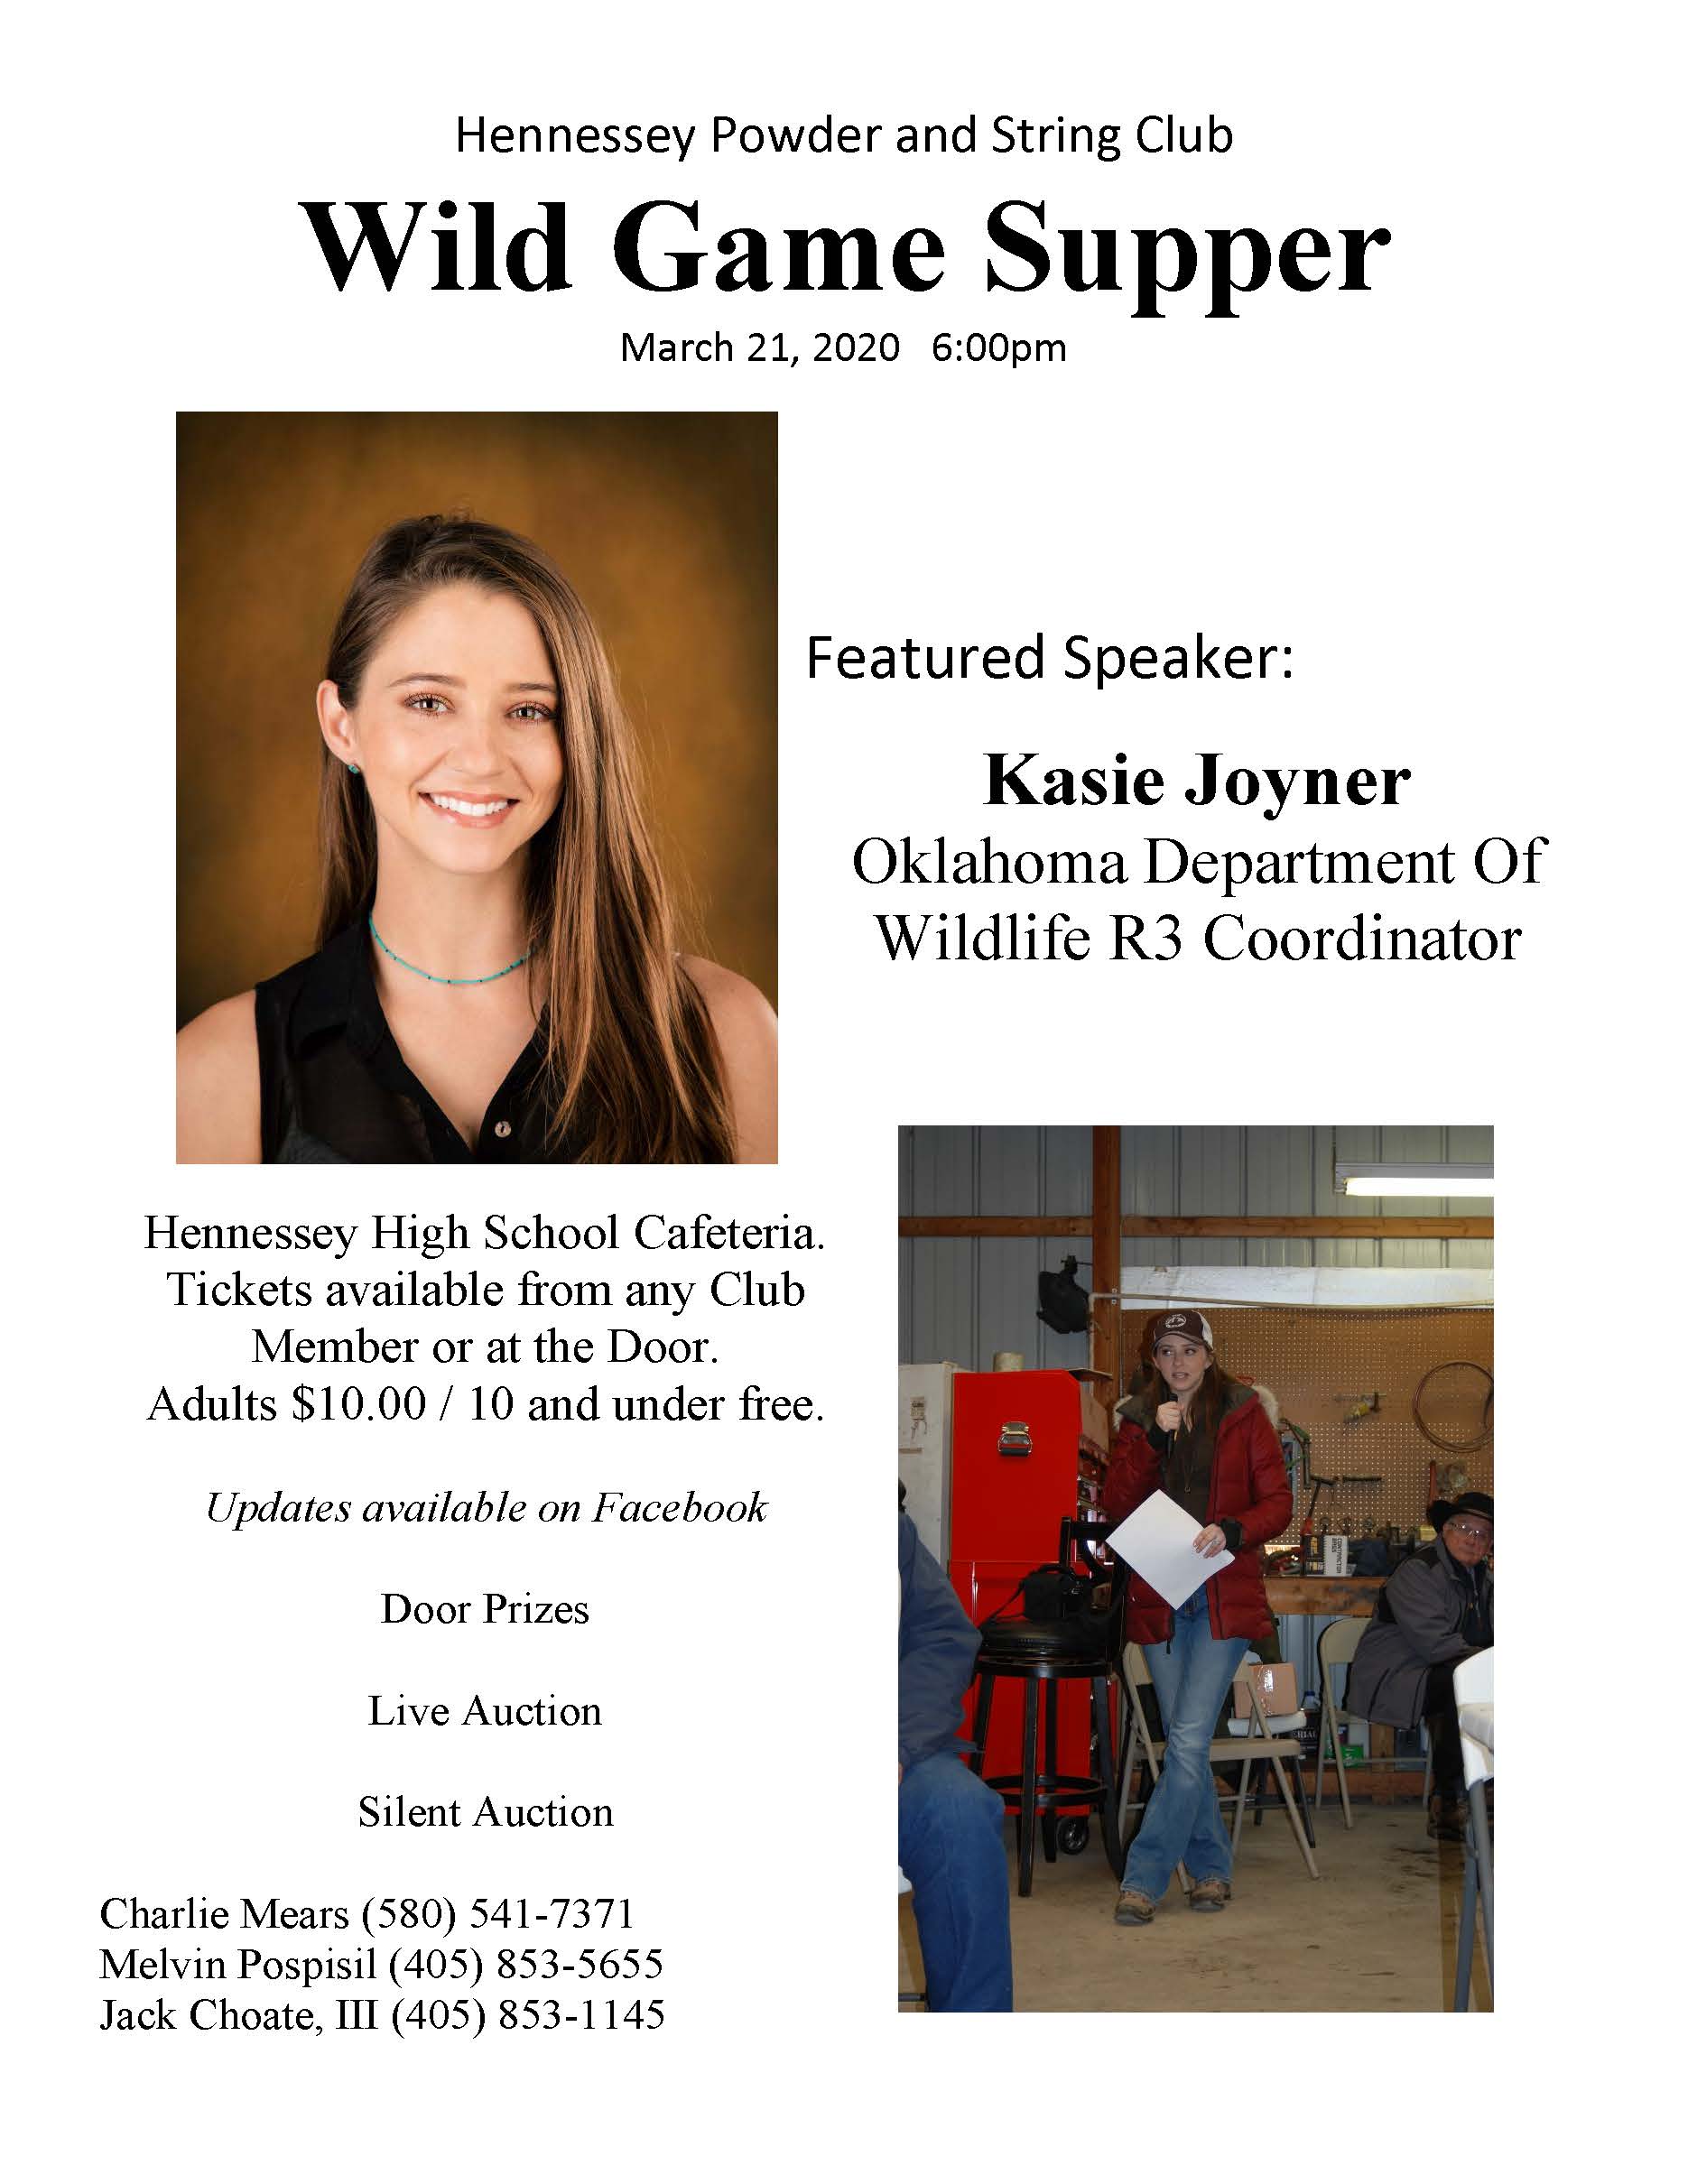 HENNESSEY POWDER AND STRING CLUB WILD GAME SUPPER